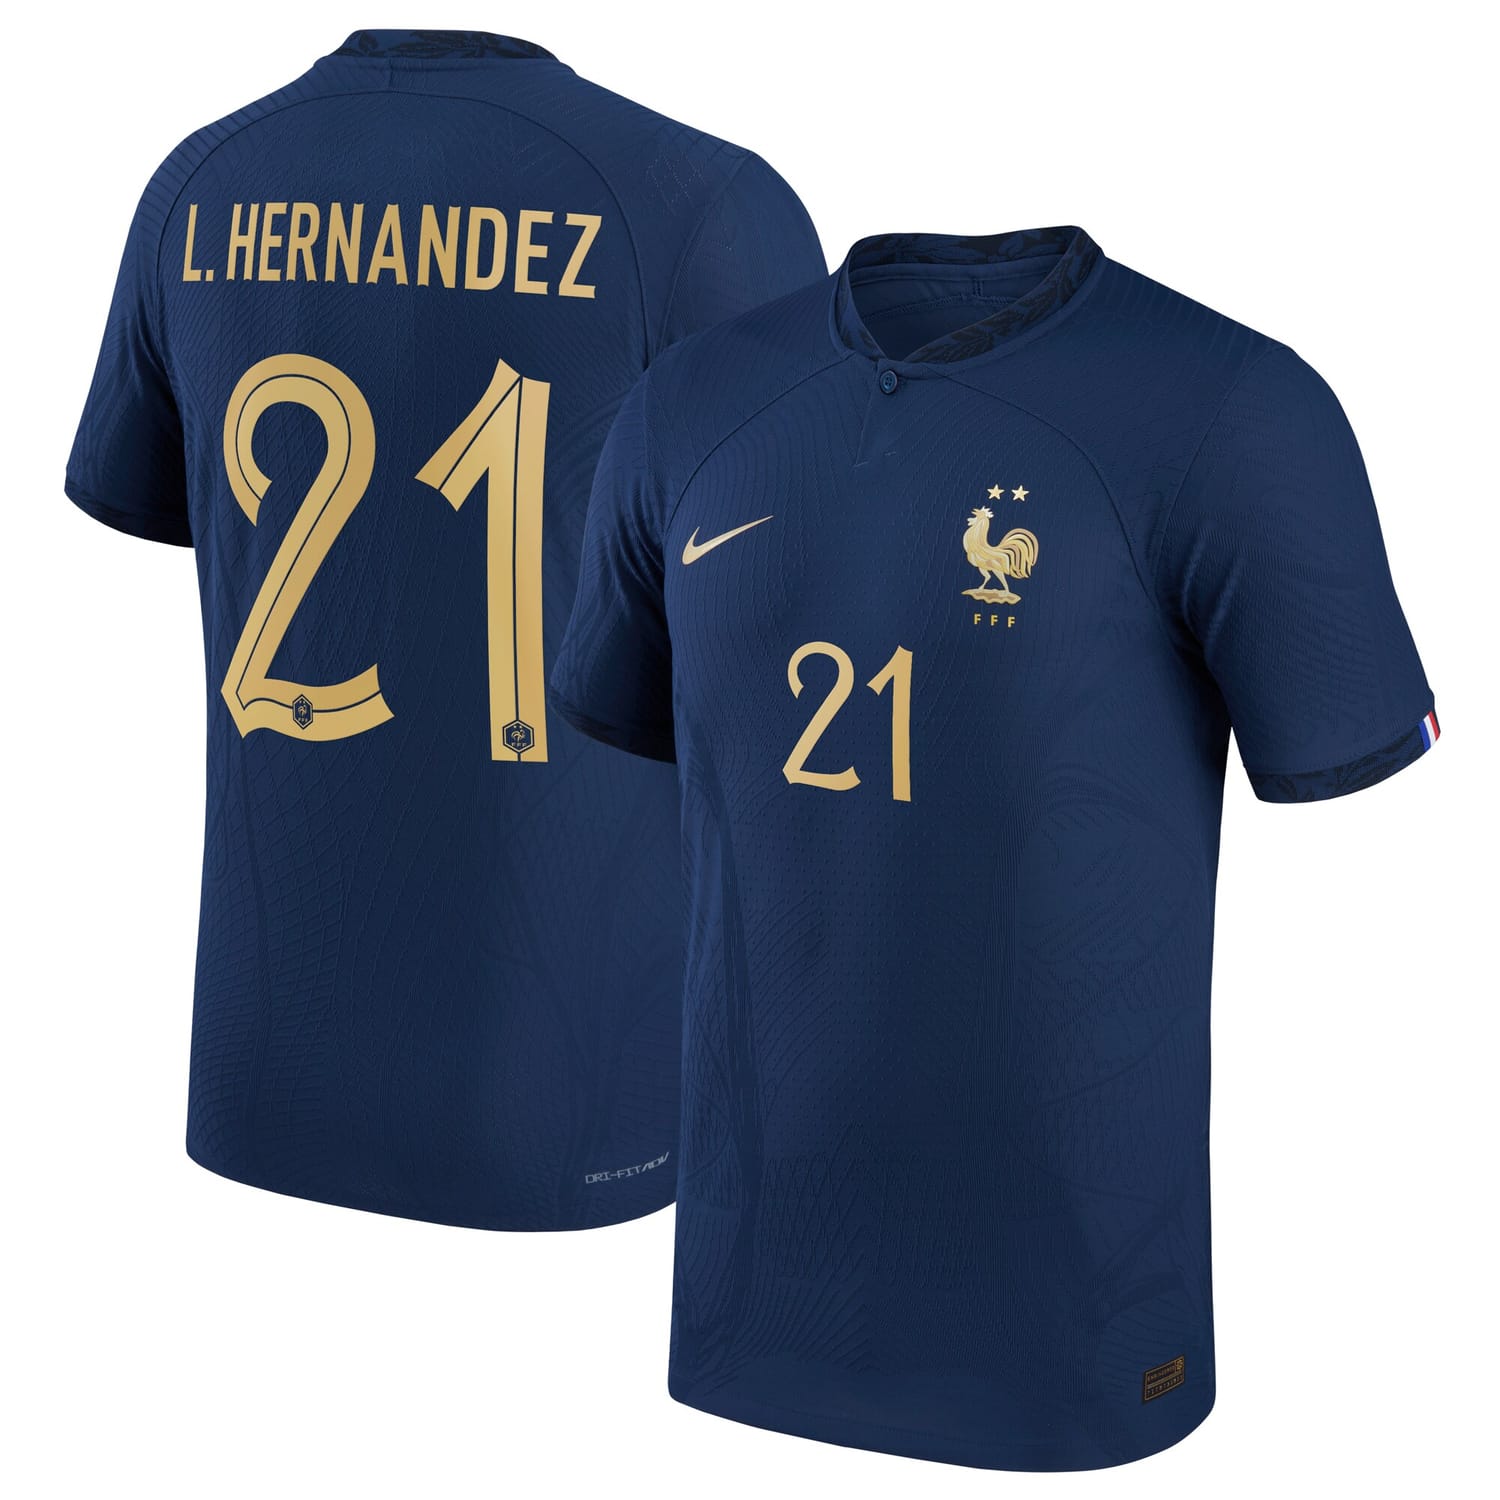 France National Team Home Authentic Jersey Shirt 2022 player L.Hernandez 21 printing for Men